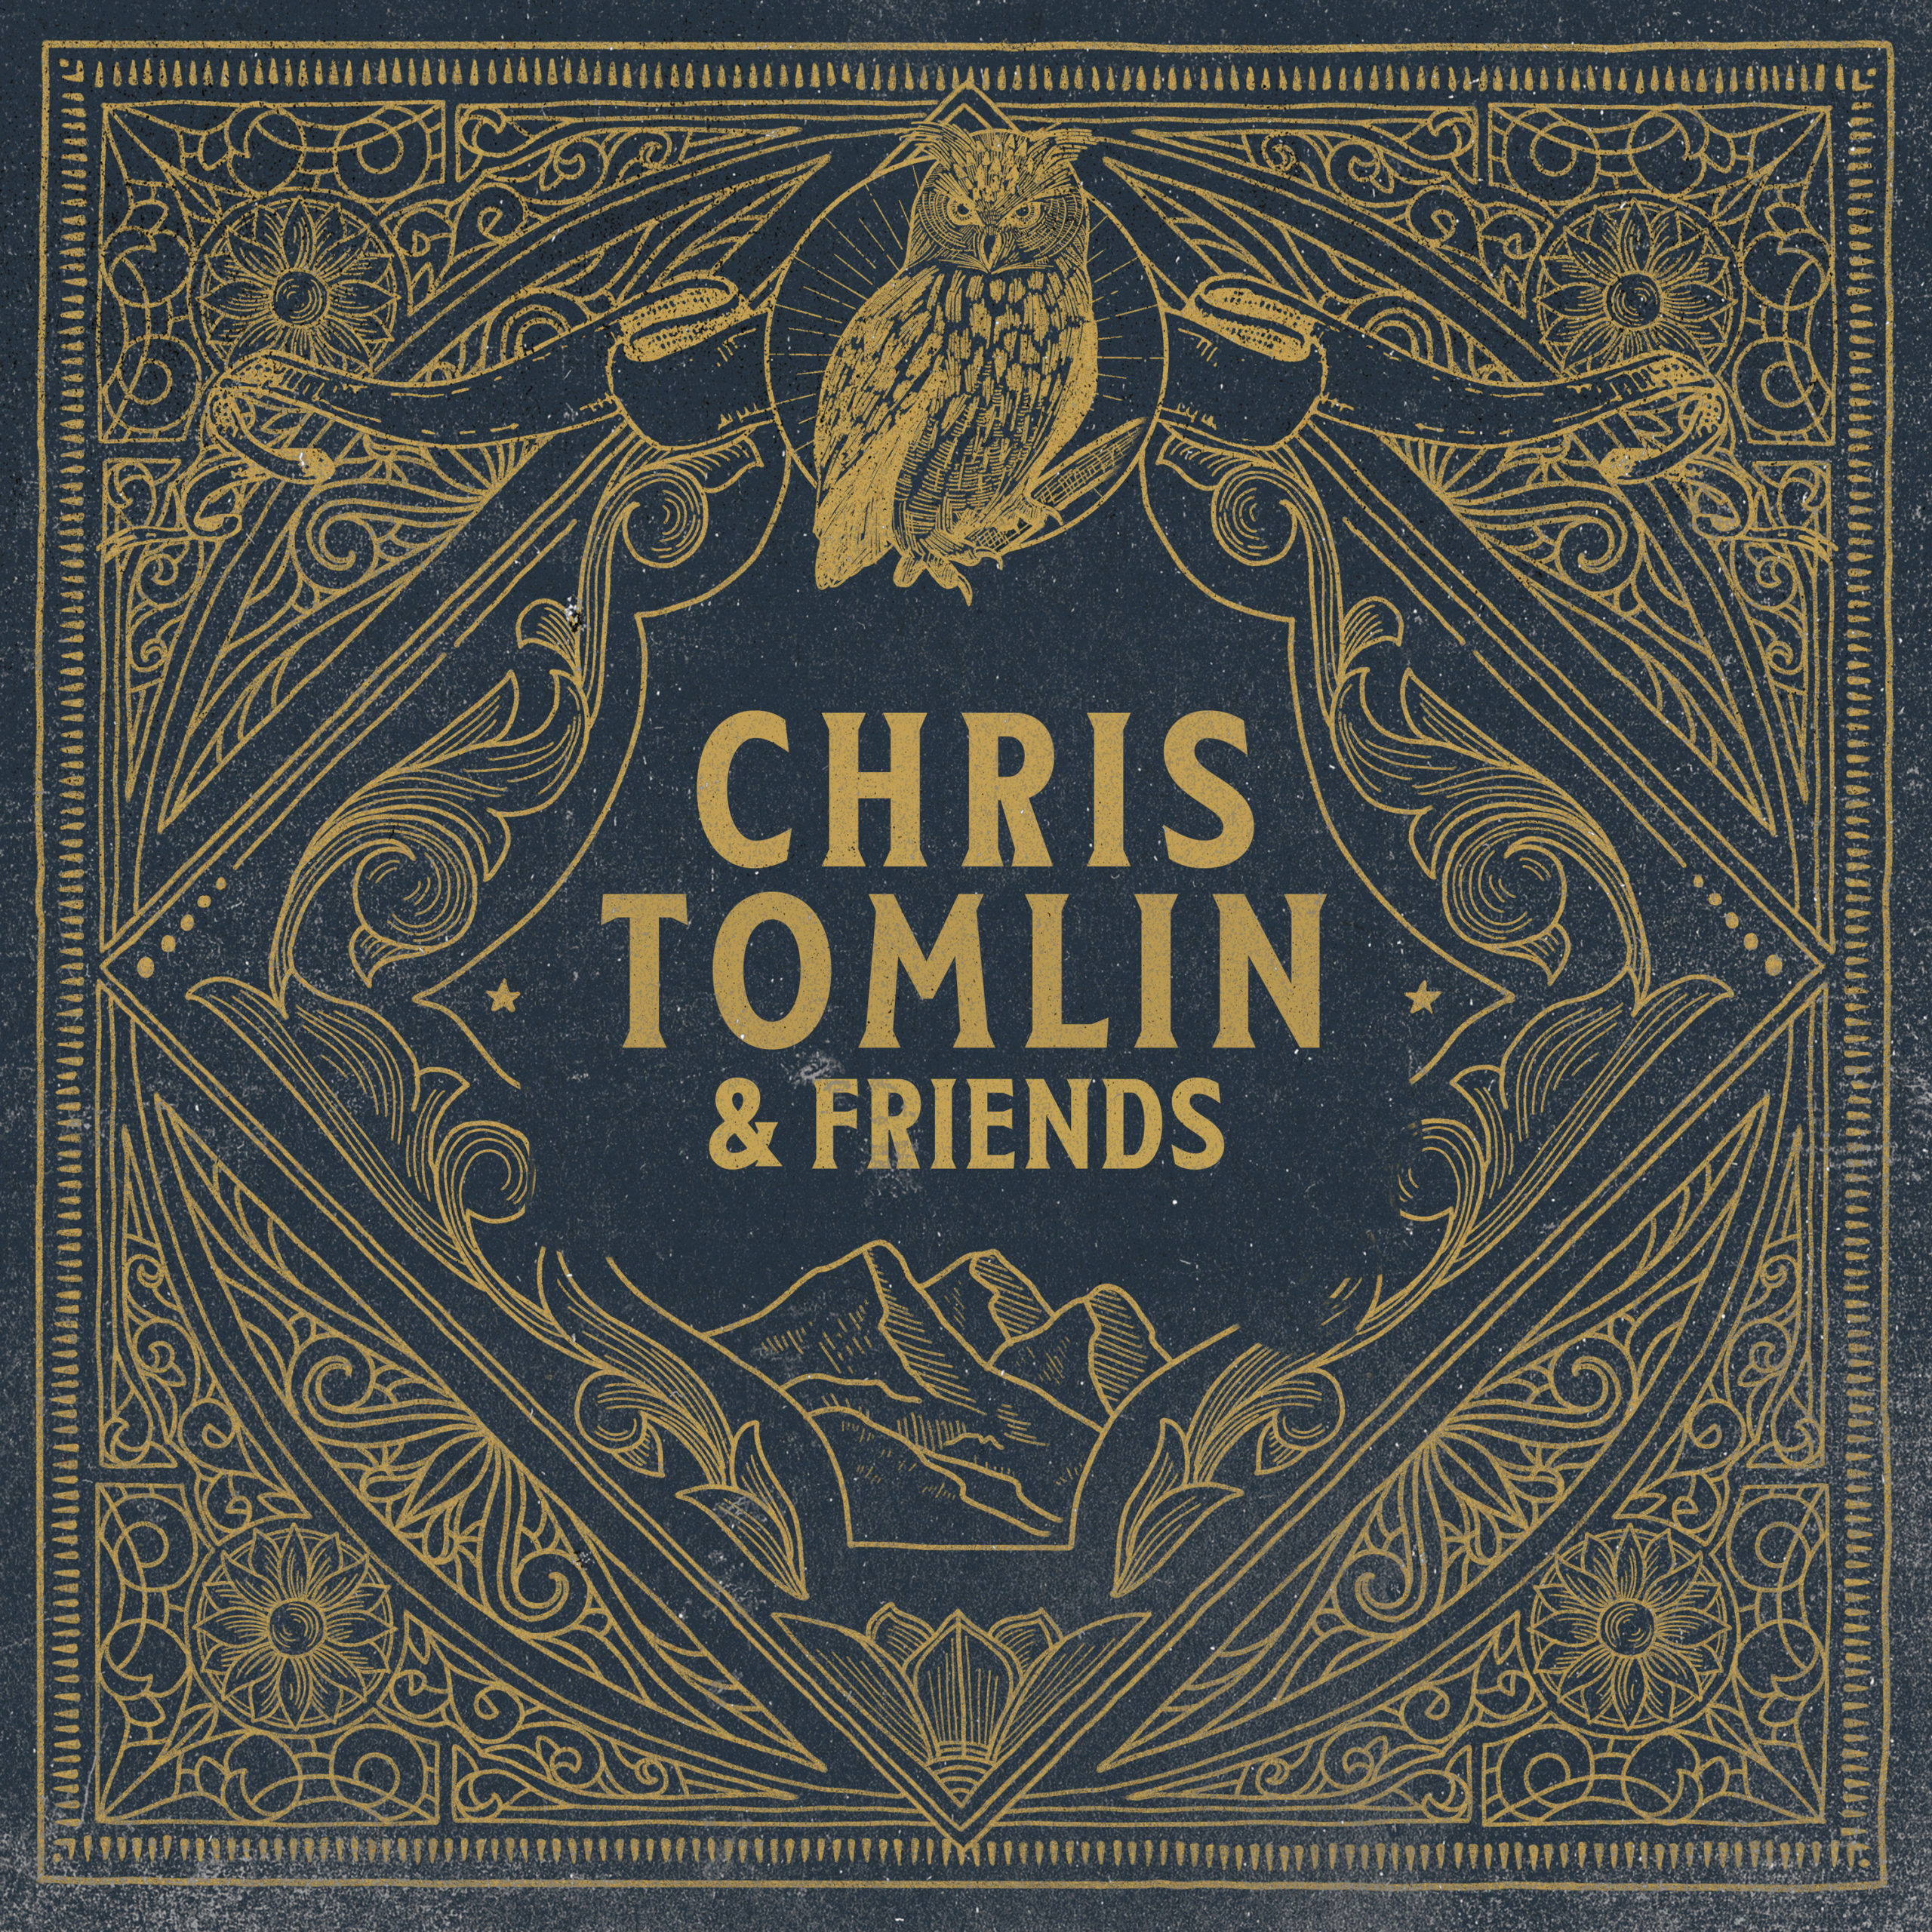 Chris Tomlin Drops Collaborative Album With Star-Studded Features, Including FGL, Lady A, Thomas Rhett and More